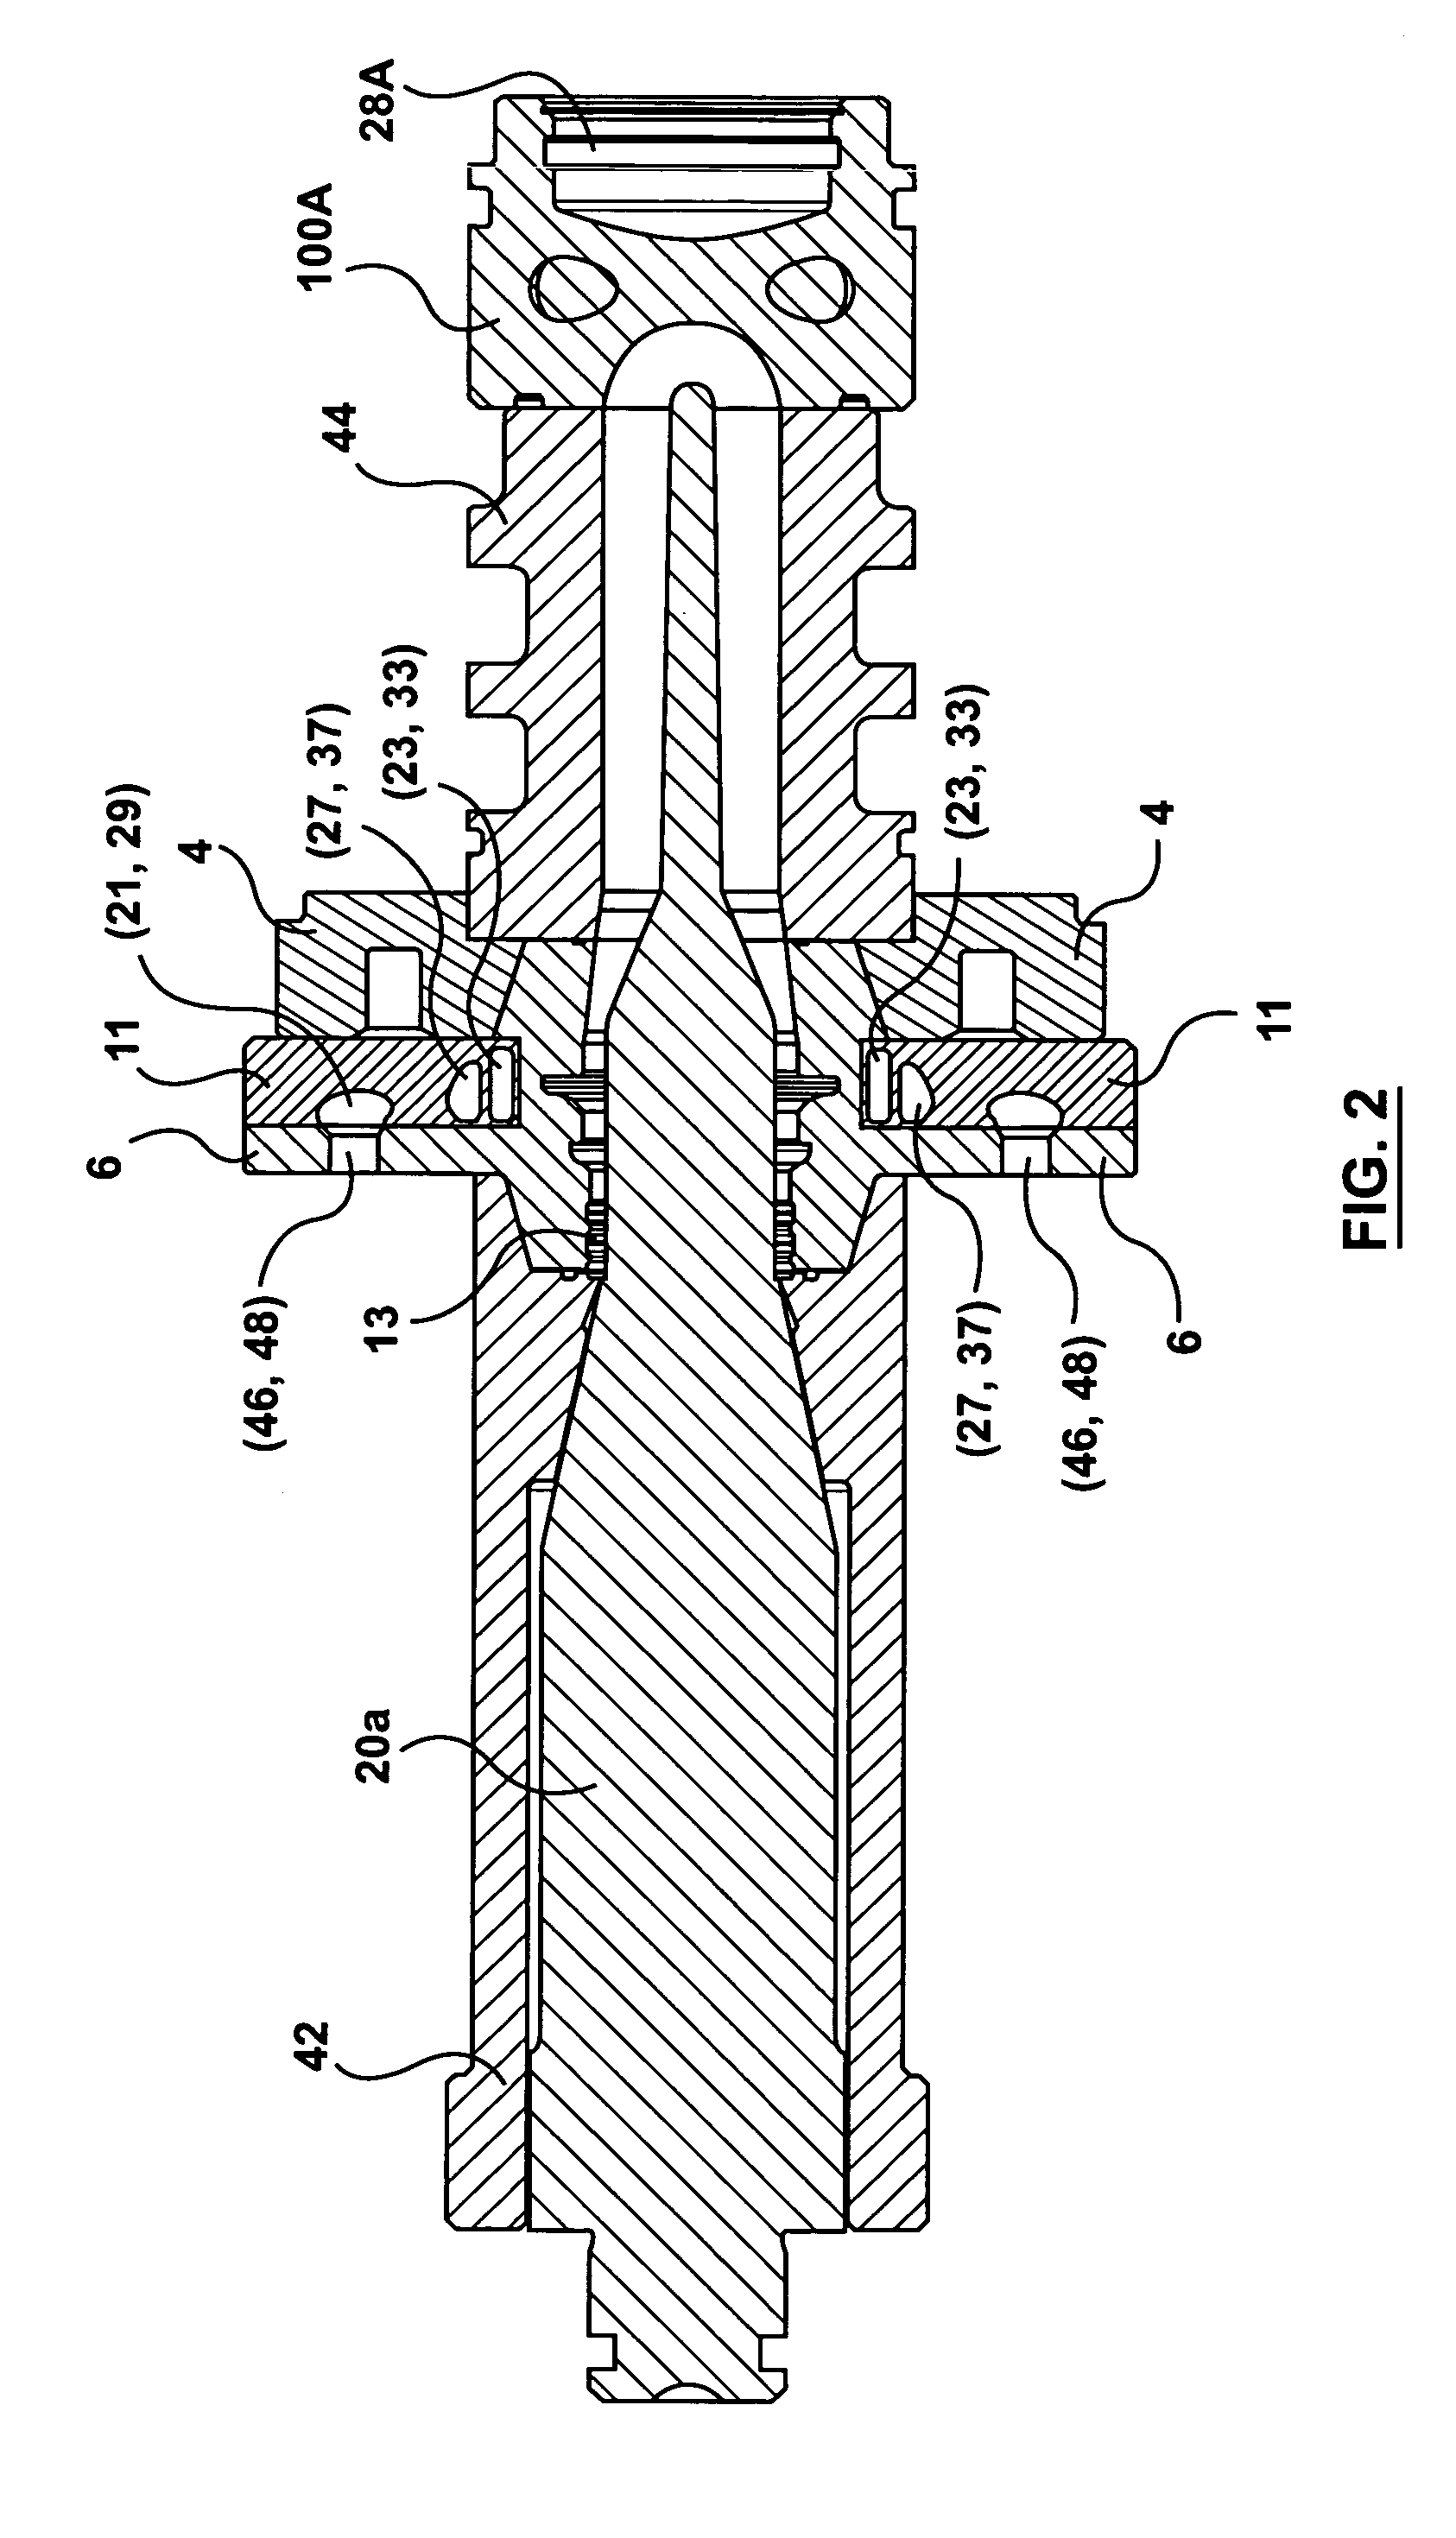 Cooling circuit for cooling neck ring of preforms